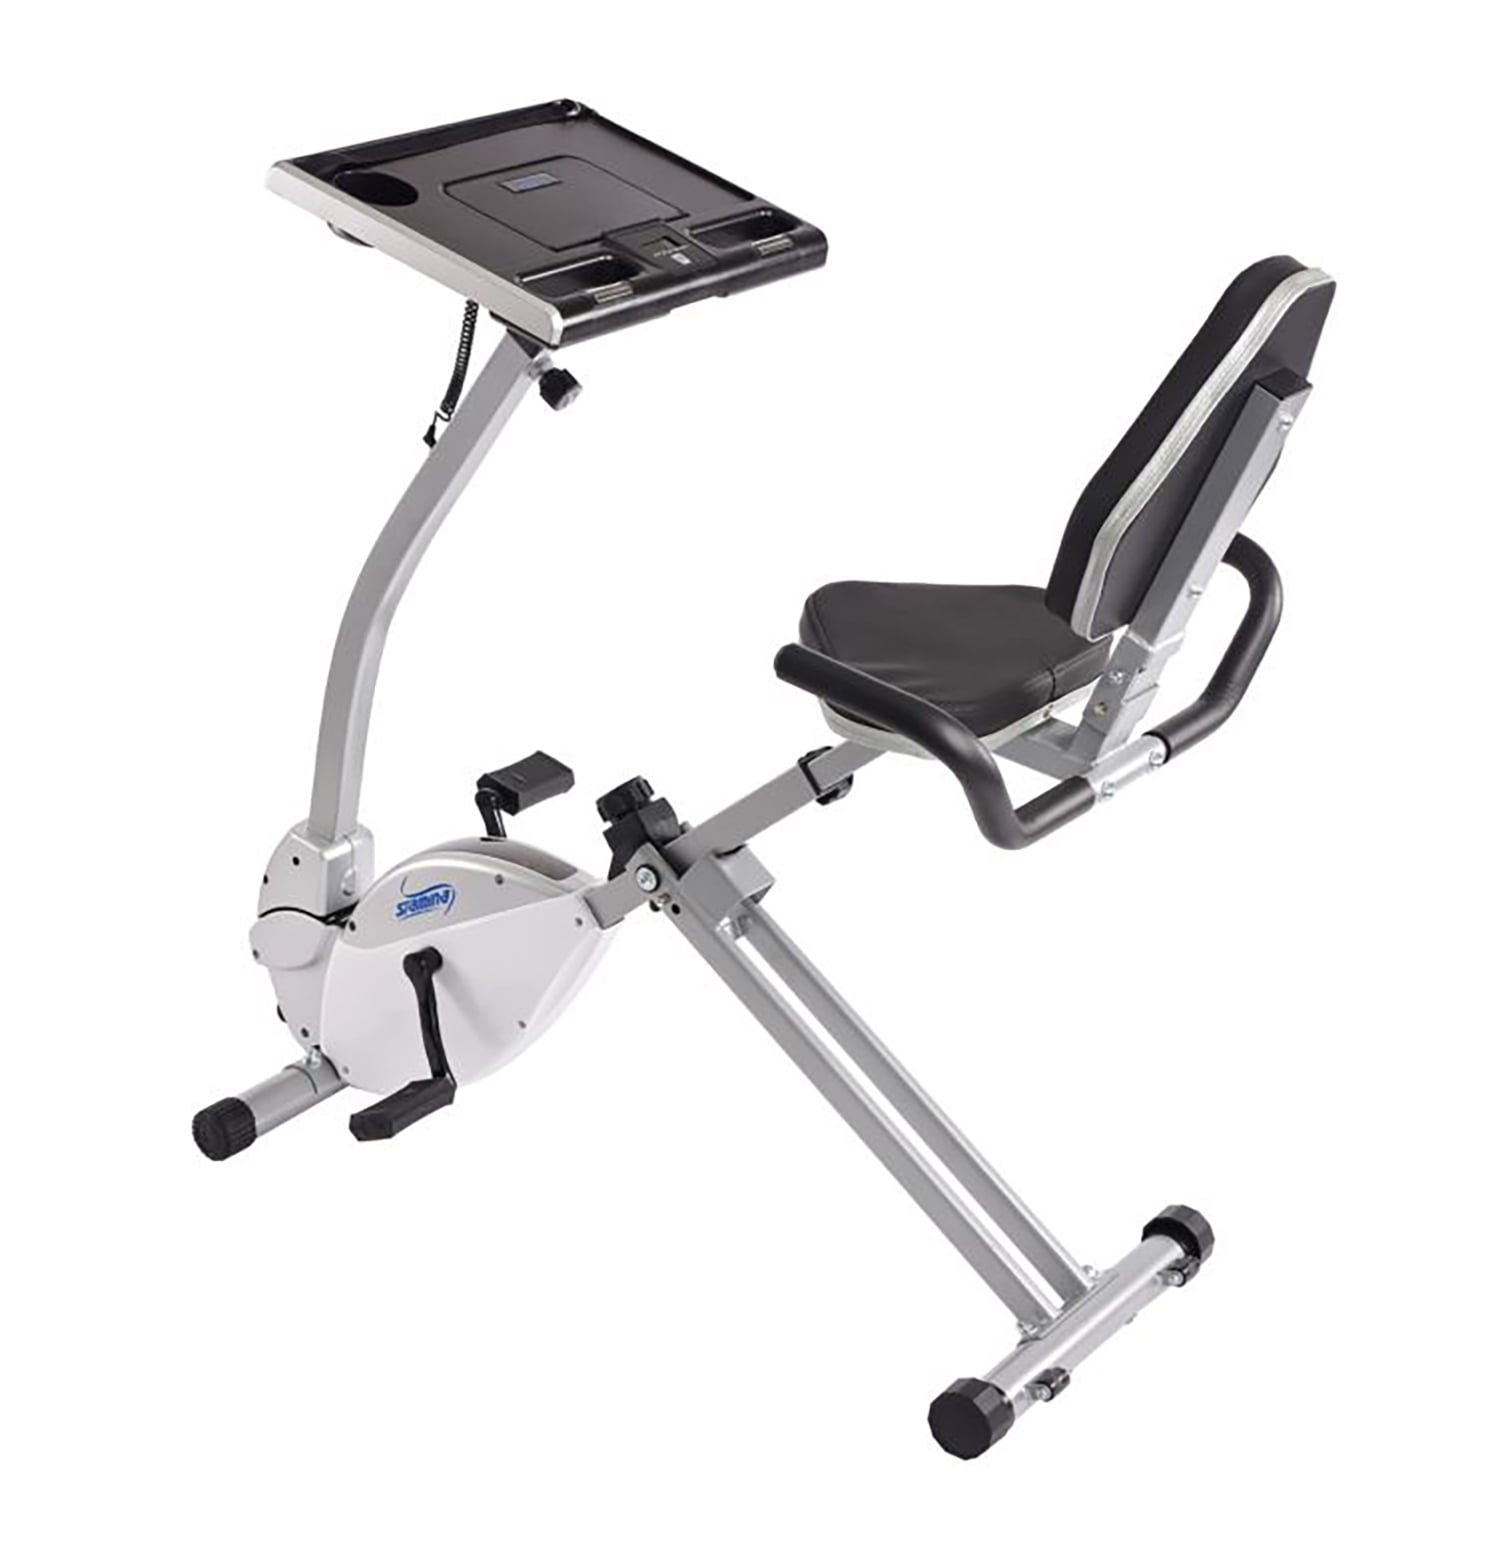 WIRK Ride Cycling Exercise Bike Stand-Up Workstation Laptop Computer Tablet Desk